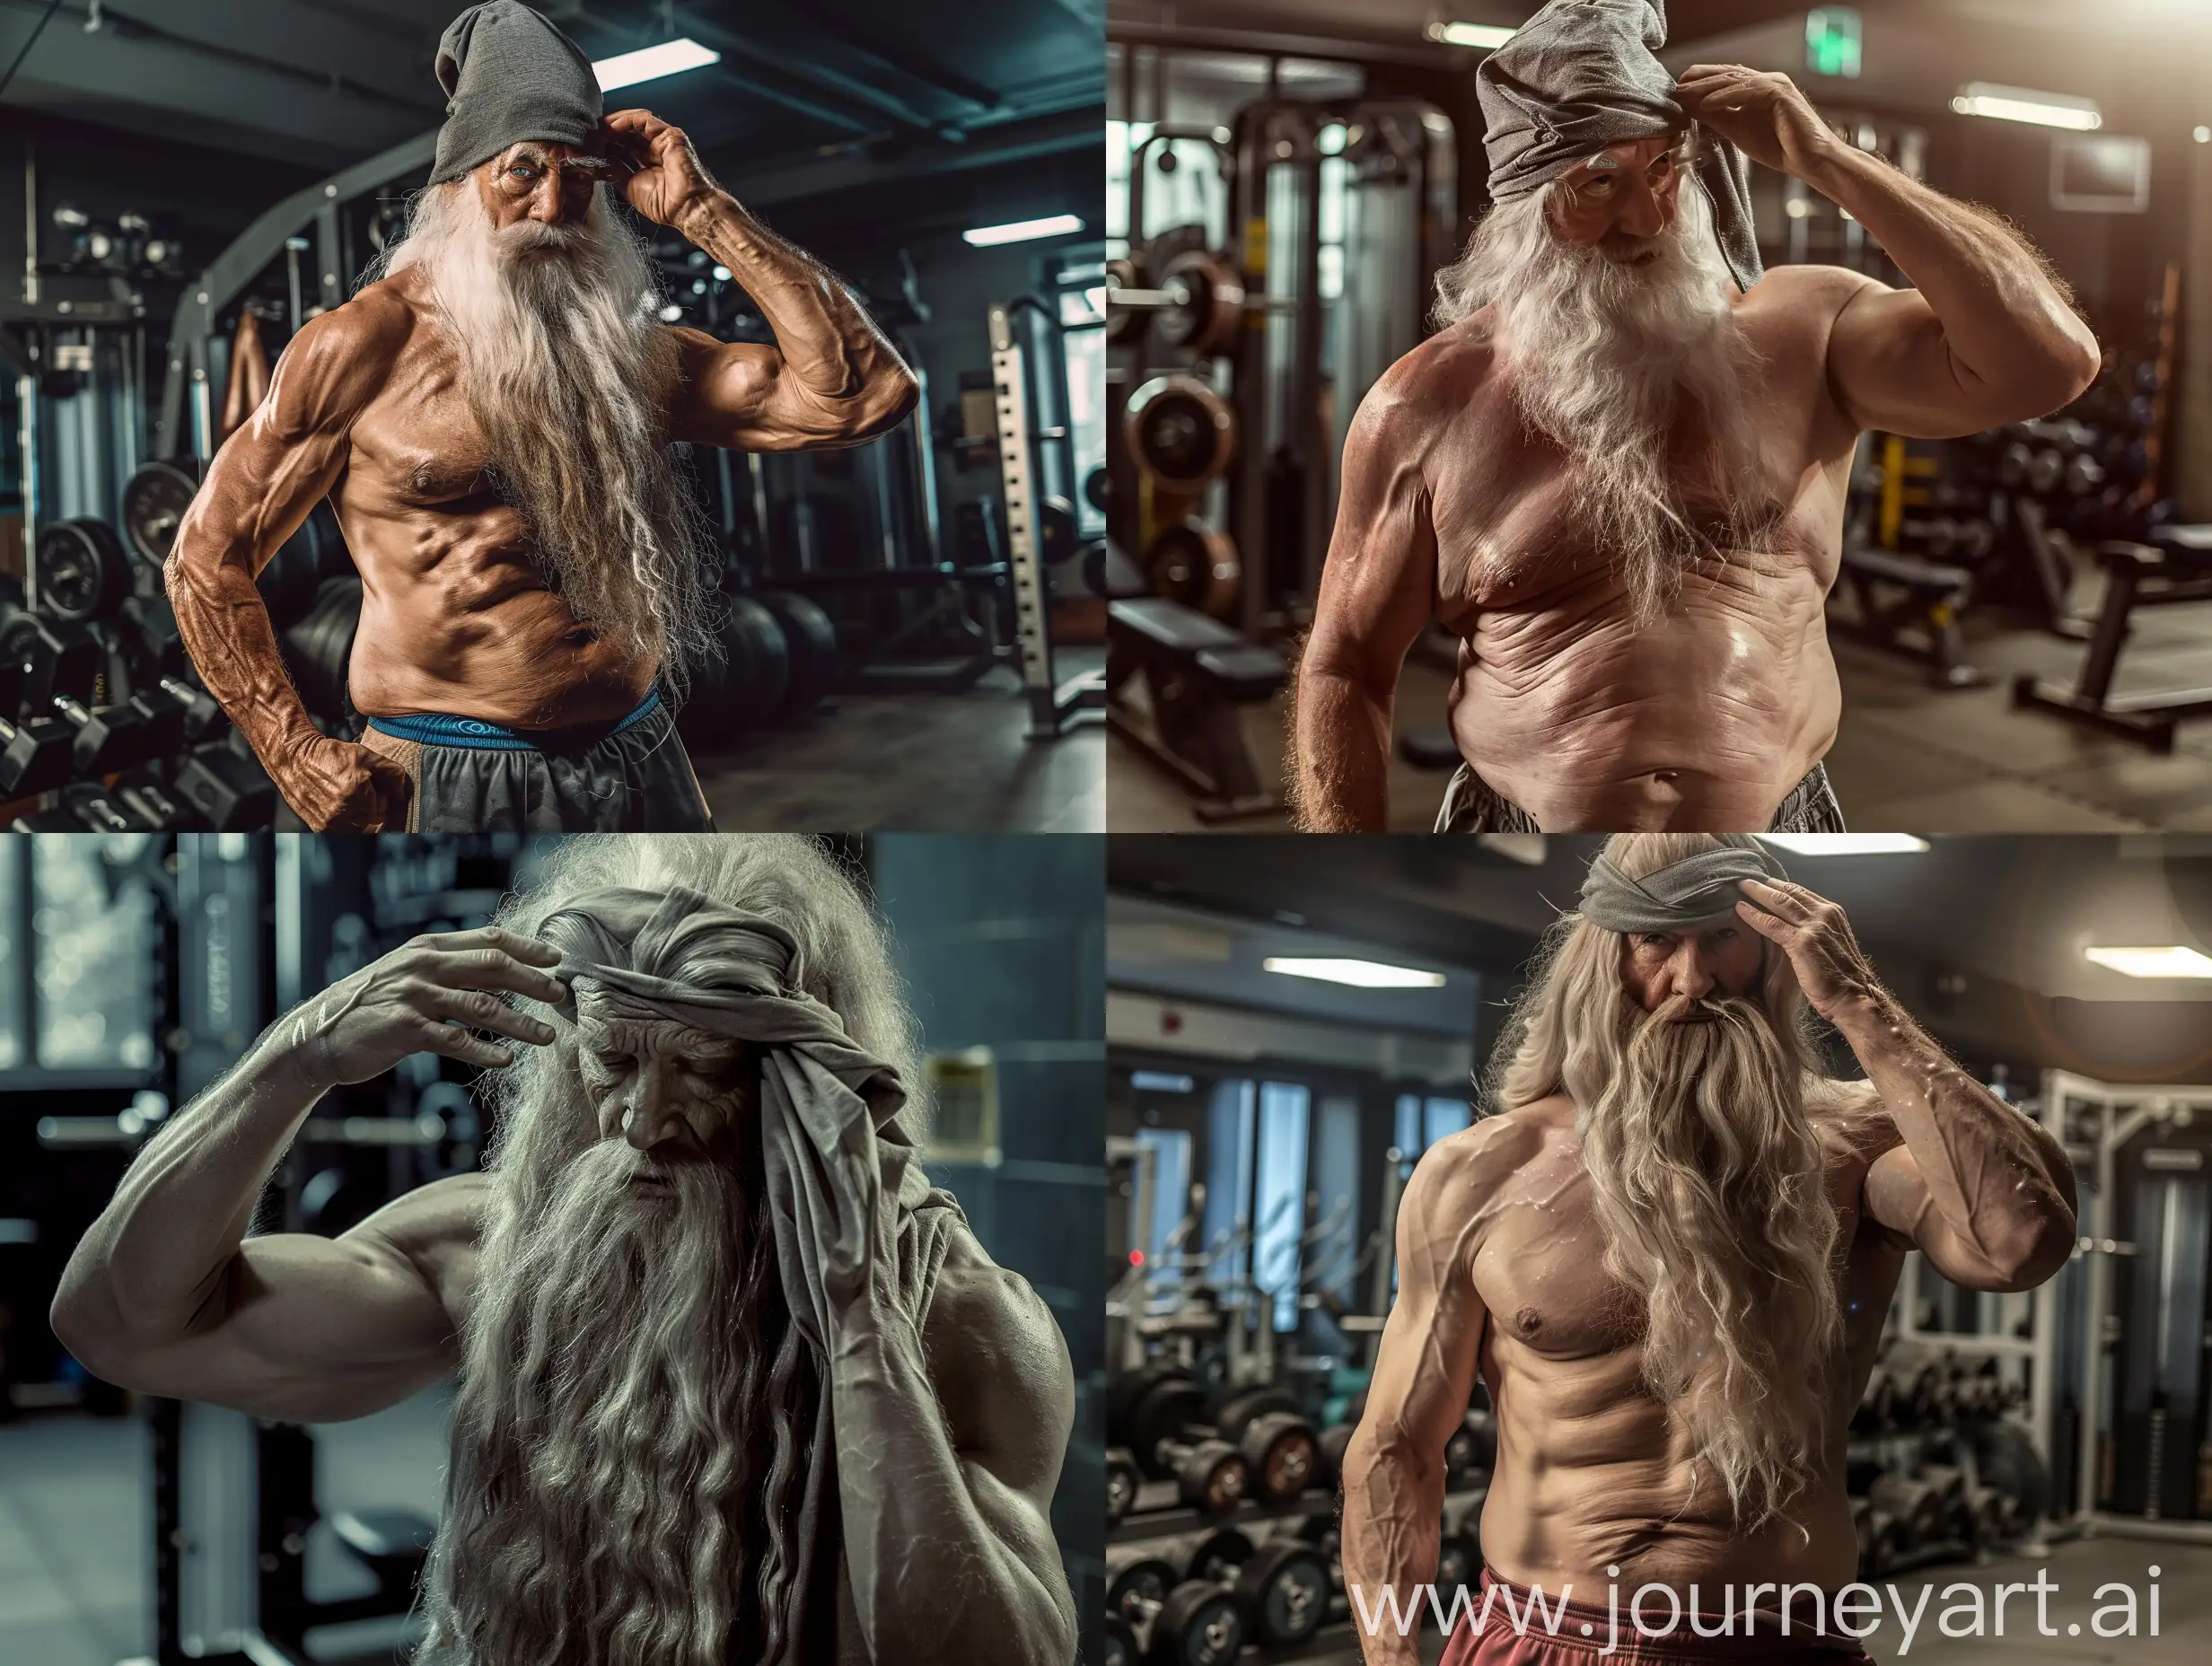 The character of Dumbledore from the Harry Potter series with a muscular body, in the gym, wearing sportswear, touching his long beard, realistic, cinematic lighting, q2